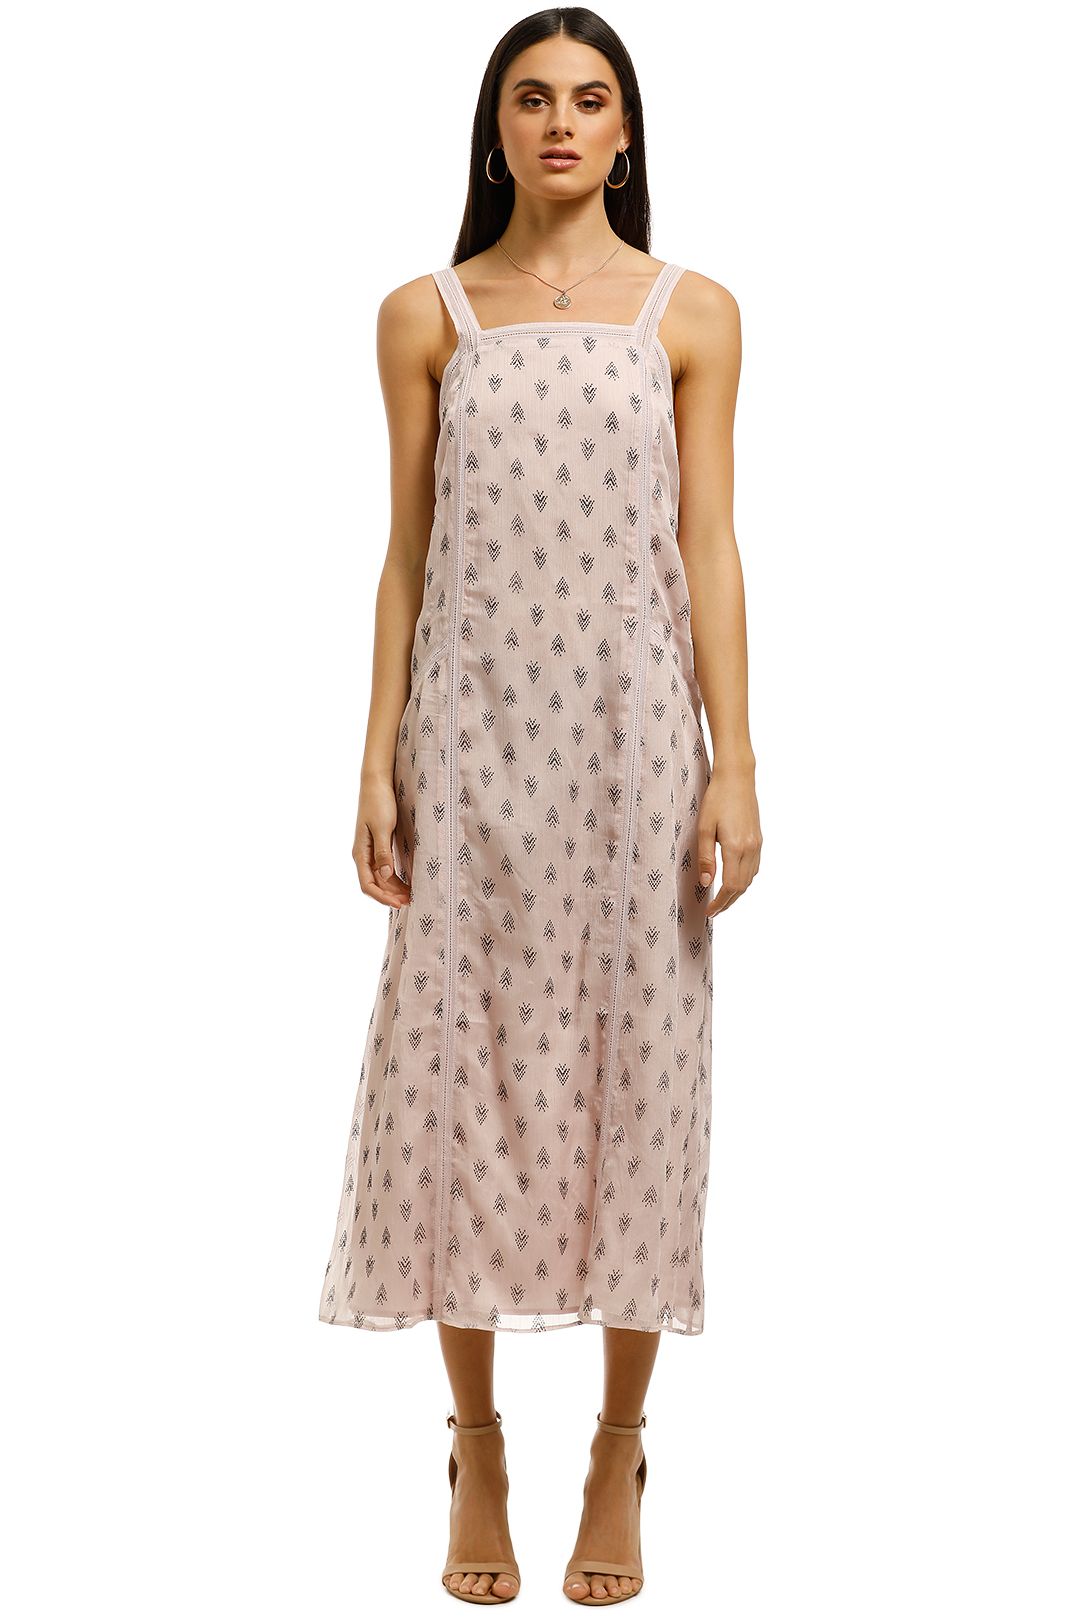 Stevie-May-On-Hold-Midi-Dress-Pink-Front